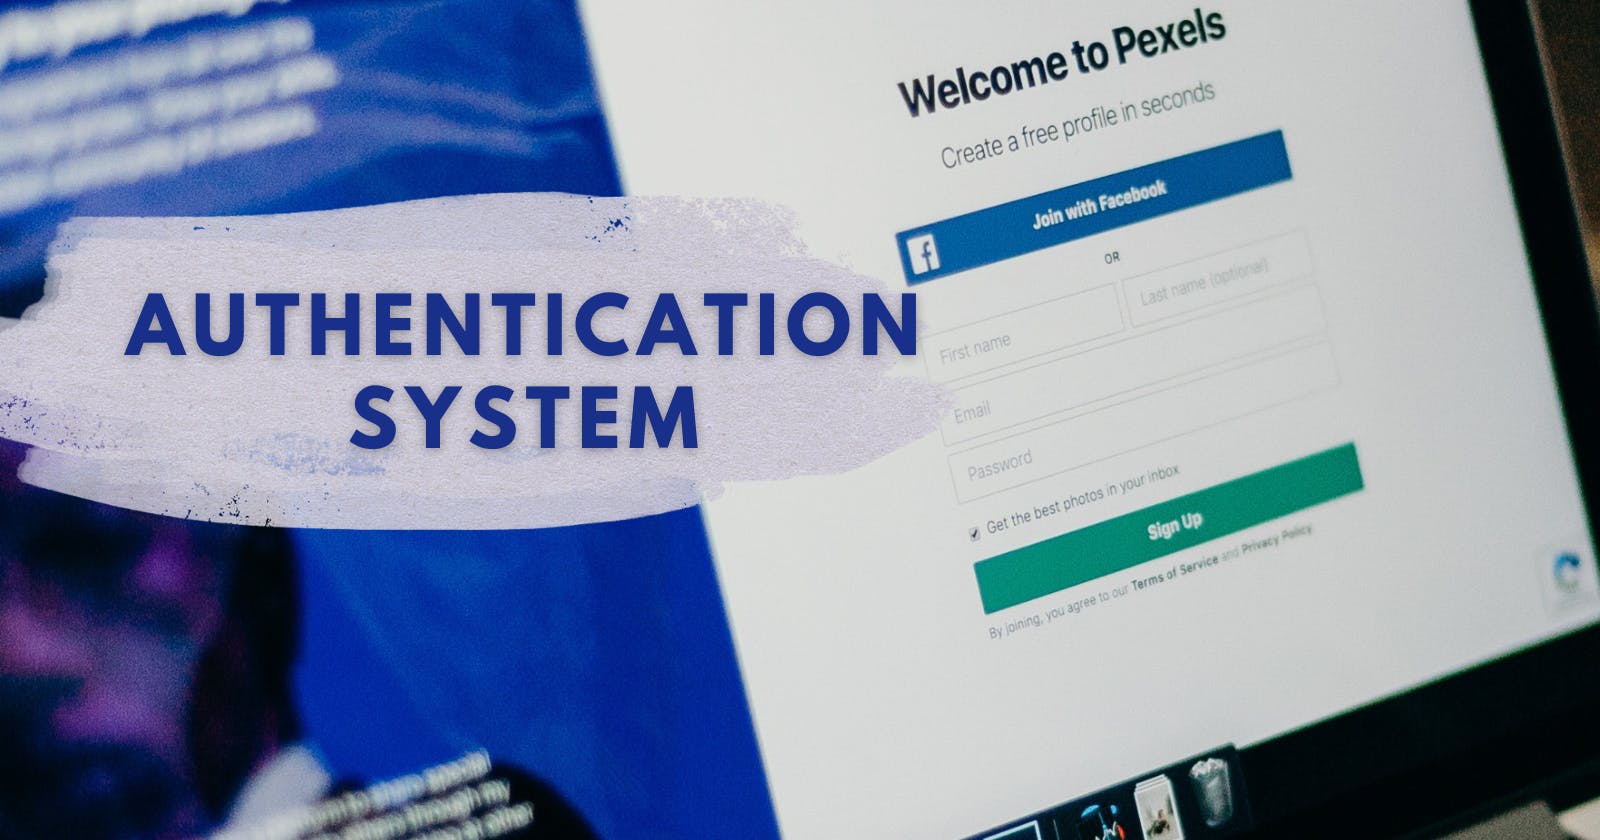 A Generalised Authentication System